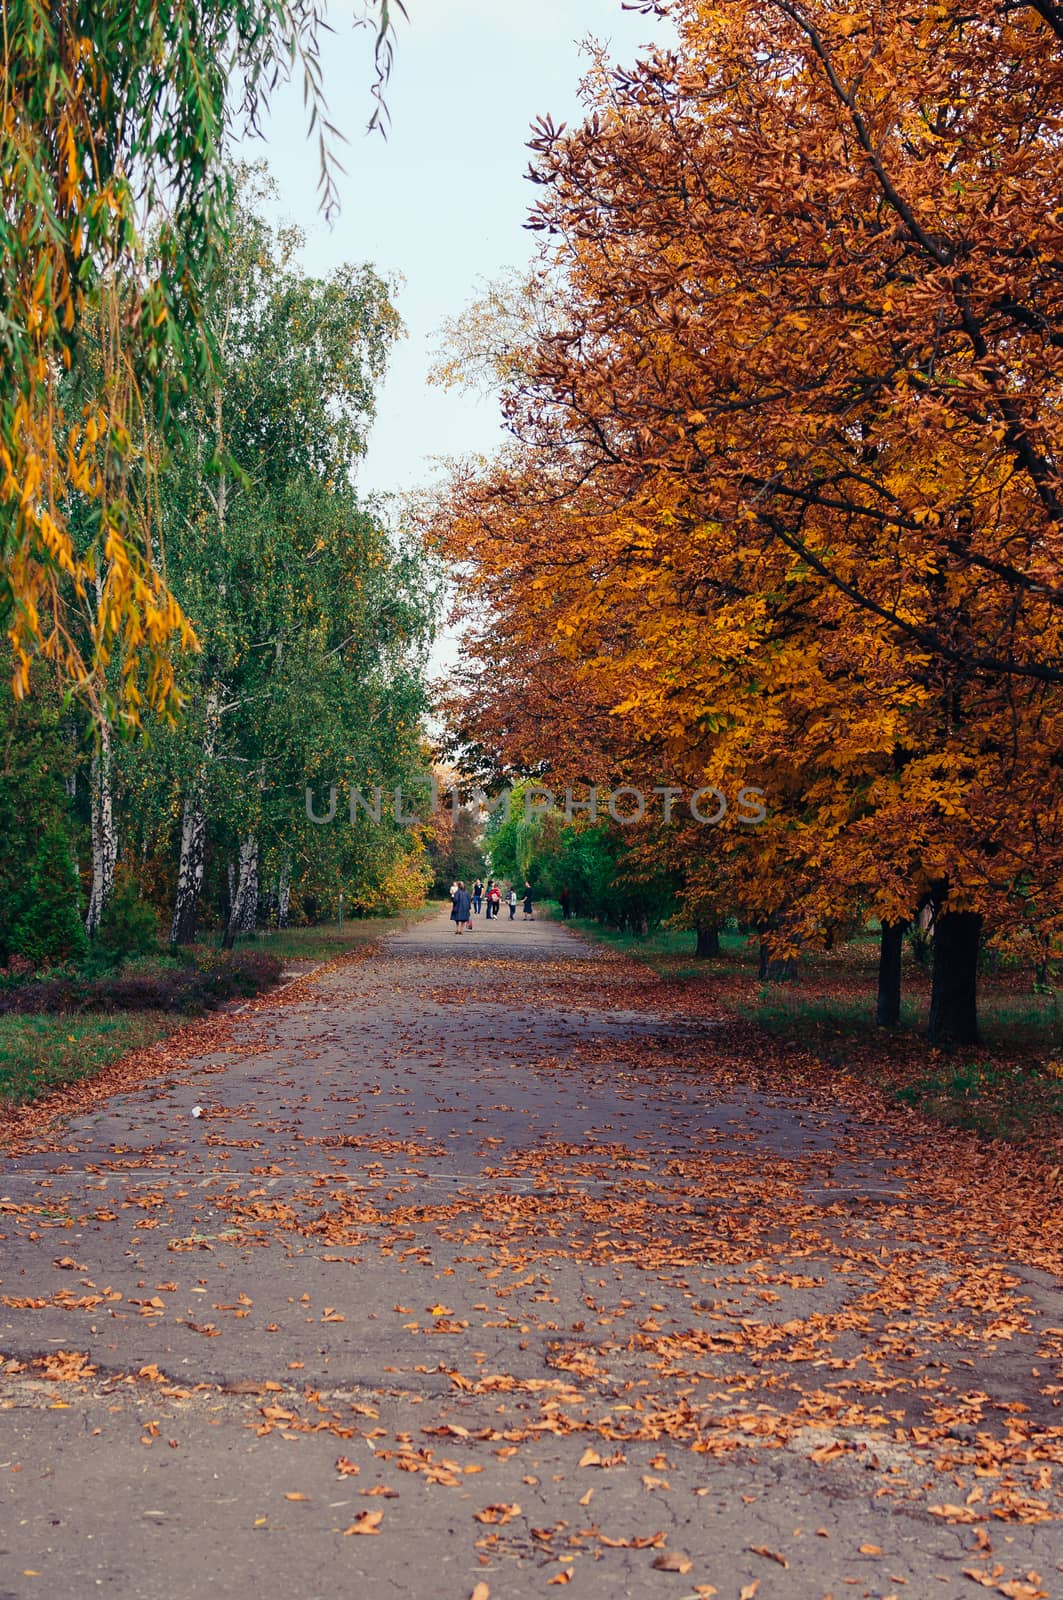 Autumn sunny landscape. The road to the autumn park with trees and fallen autumn leaves on the ground in the park on a sunny October day. Template for design. Copy space.